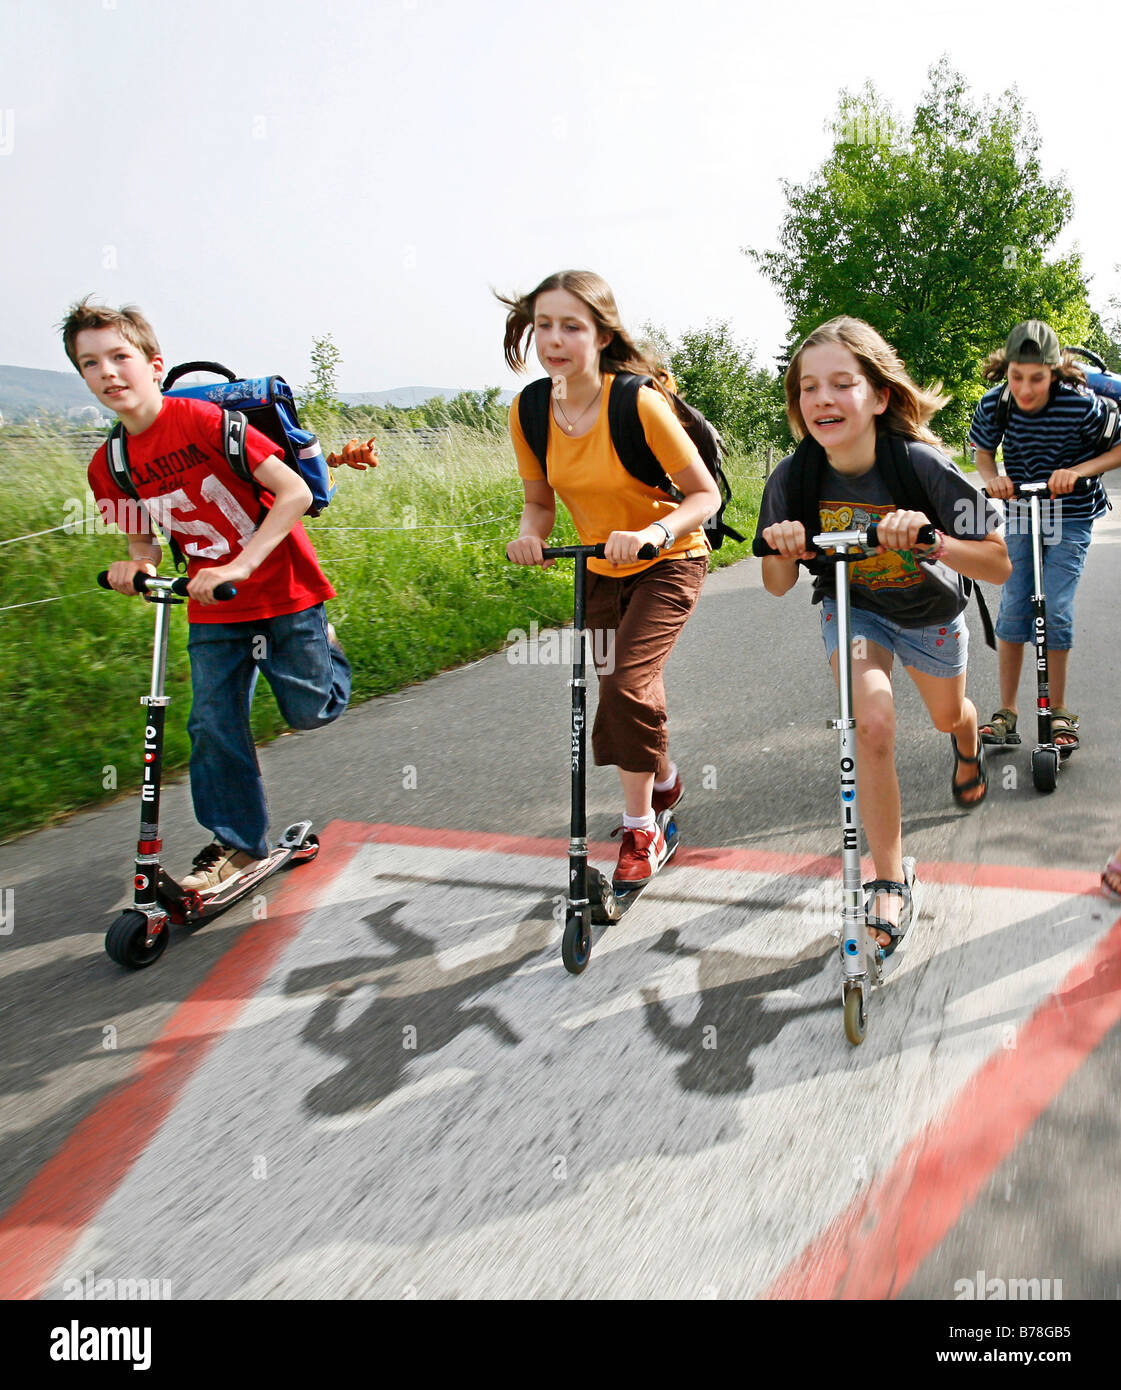 School children, boys and girls, riding kick scooters, push scooters on the  way from school, Basel, Switzerland, Europe Stock Photo - Alamy